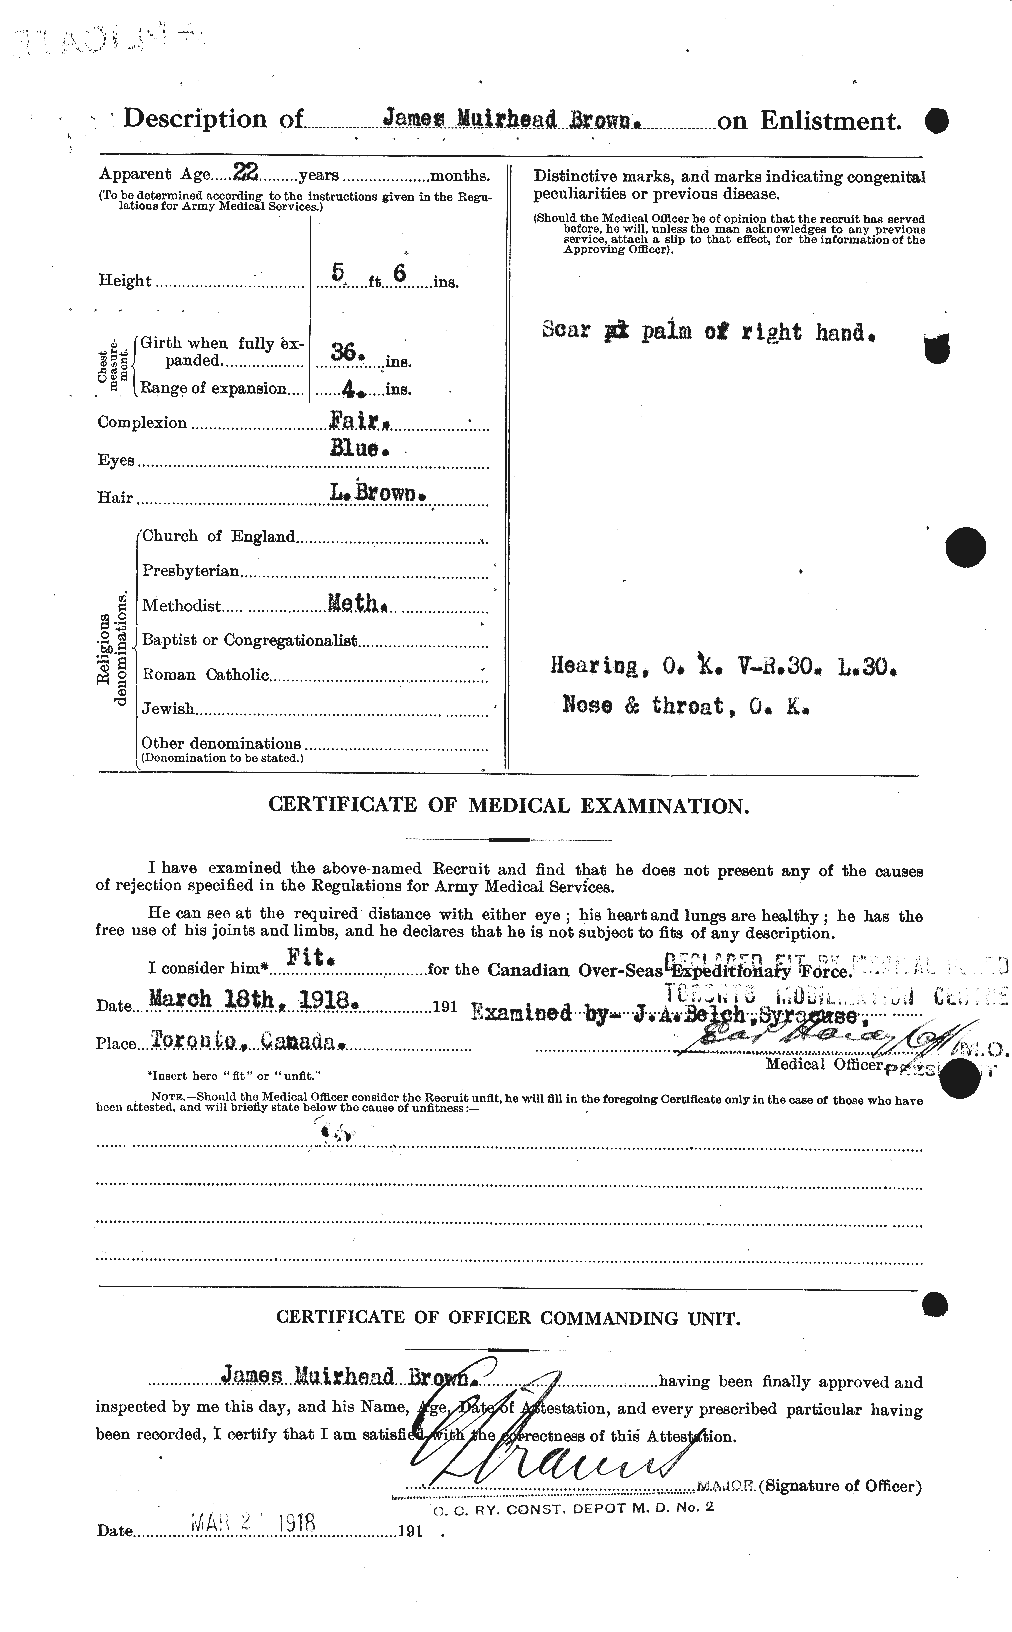 Personnel Records of the First World War - CEF 269559b